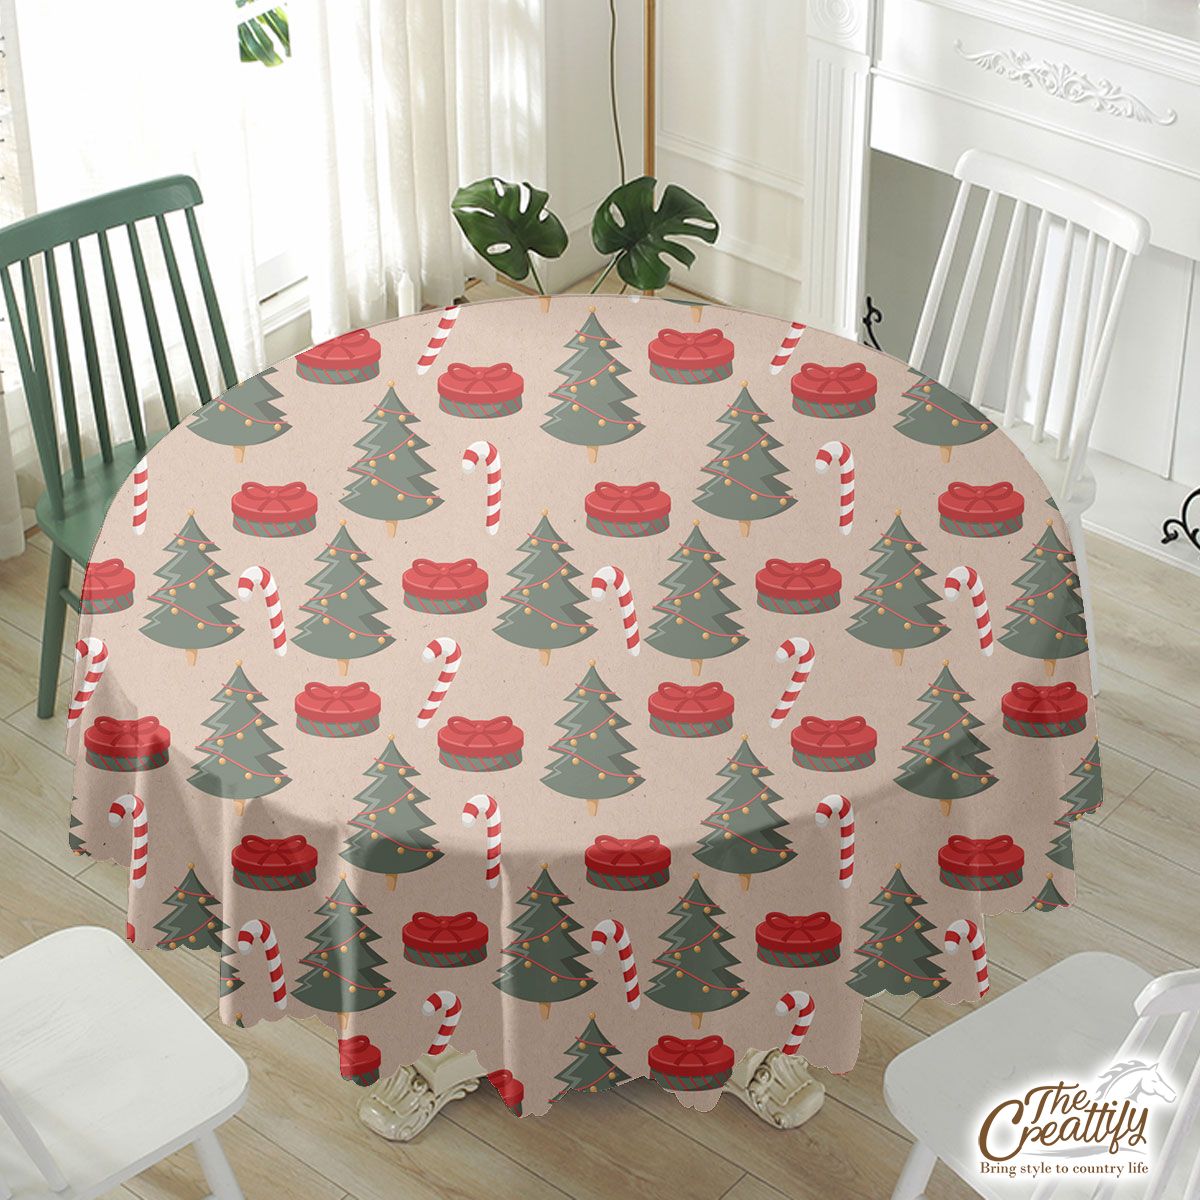 Christmas Tree, Christmas Gift, Candy Cane Waterproof Tablecloth